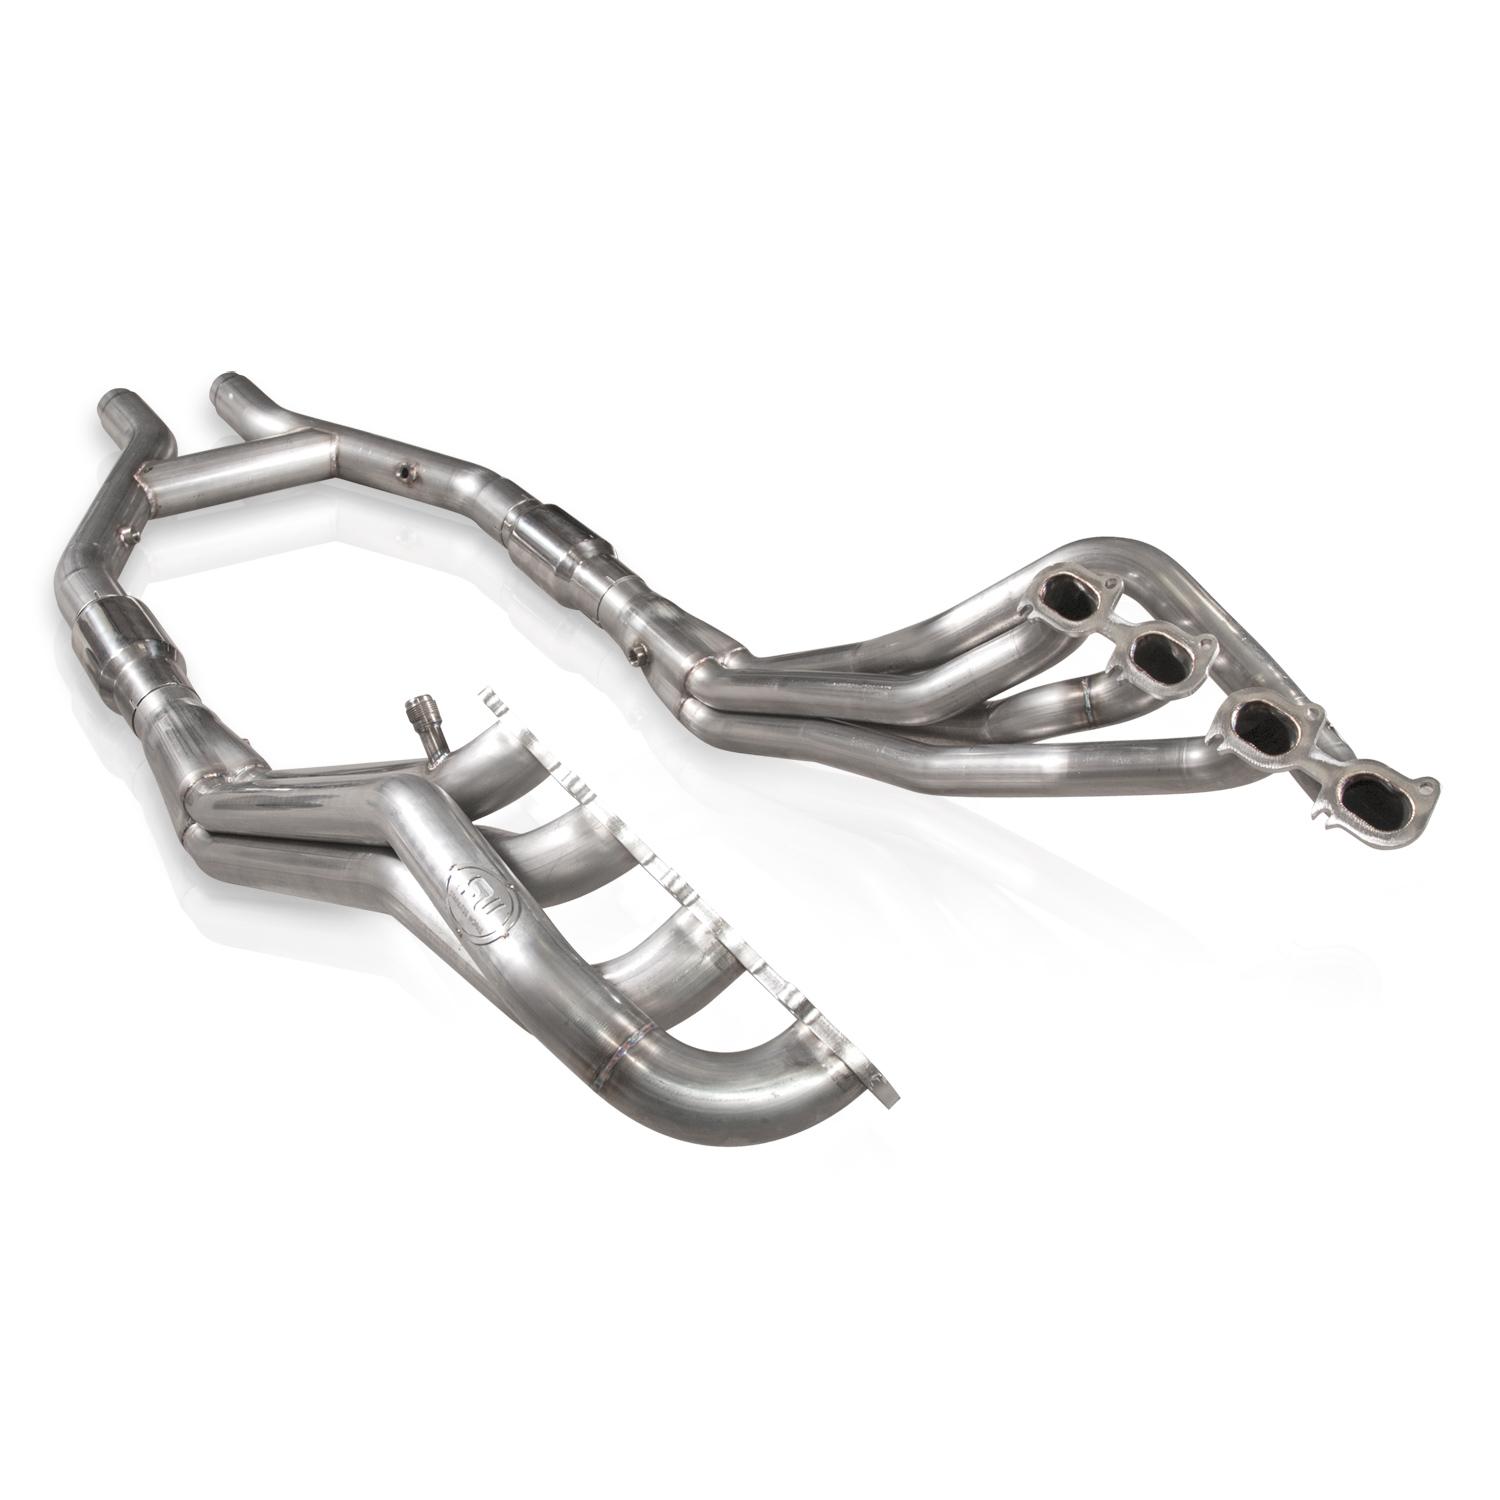 2011+ Ford Mustang GT500 Stainless Works 1 7/8" Long Tube Headers w/3" Collectors 3" Lead Pipes & Catted Hpipe